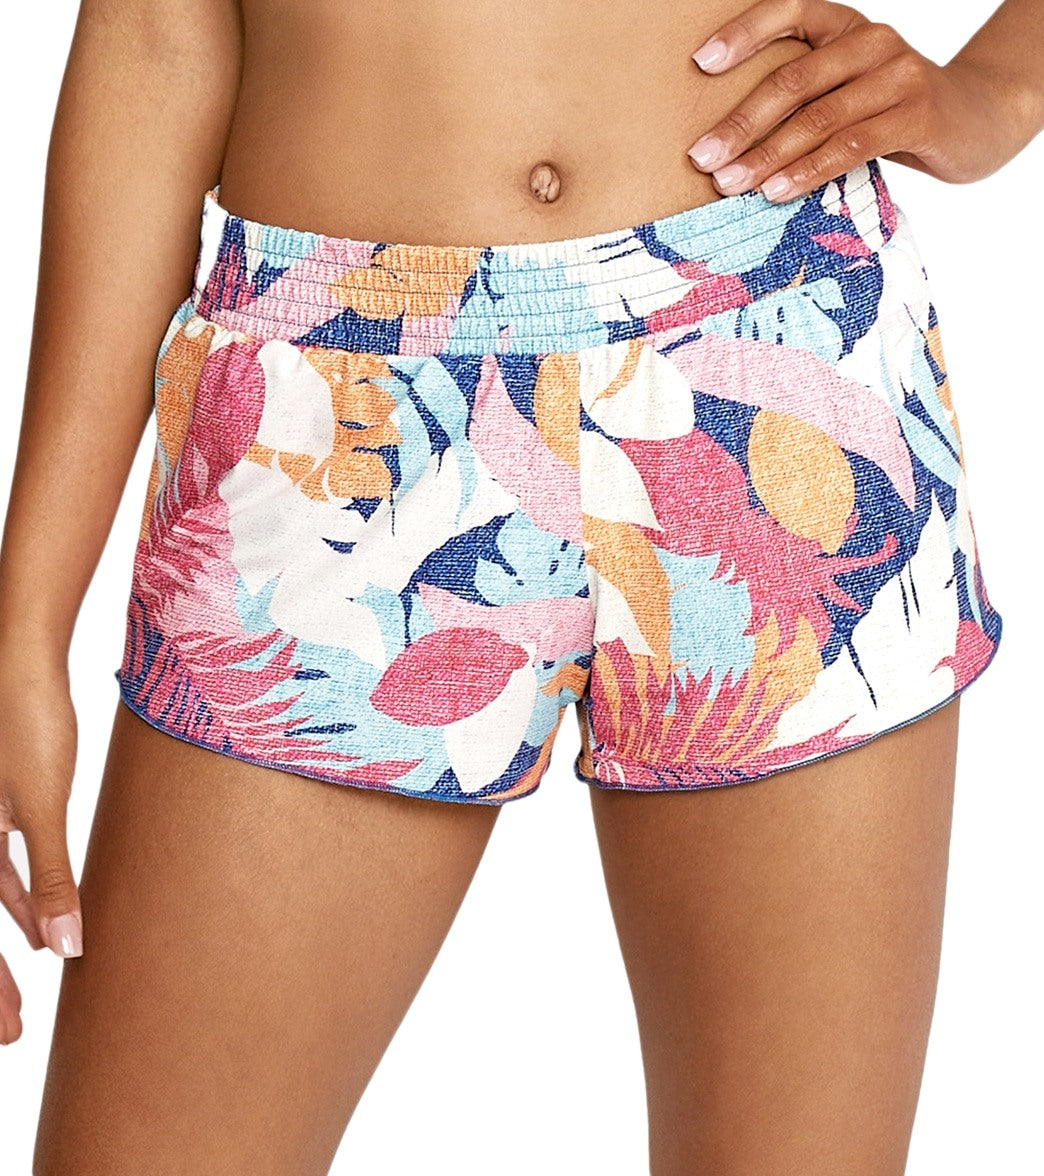 Speedo Active Women's Printed Cover Up Short at SwimOutlet.com